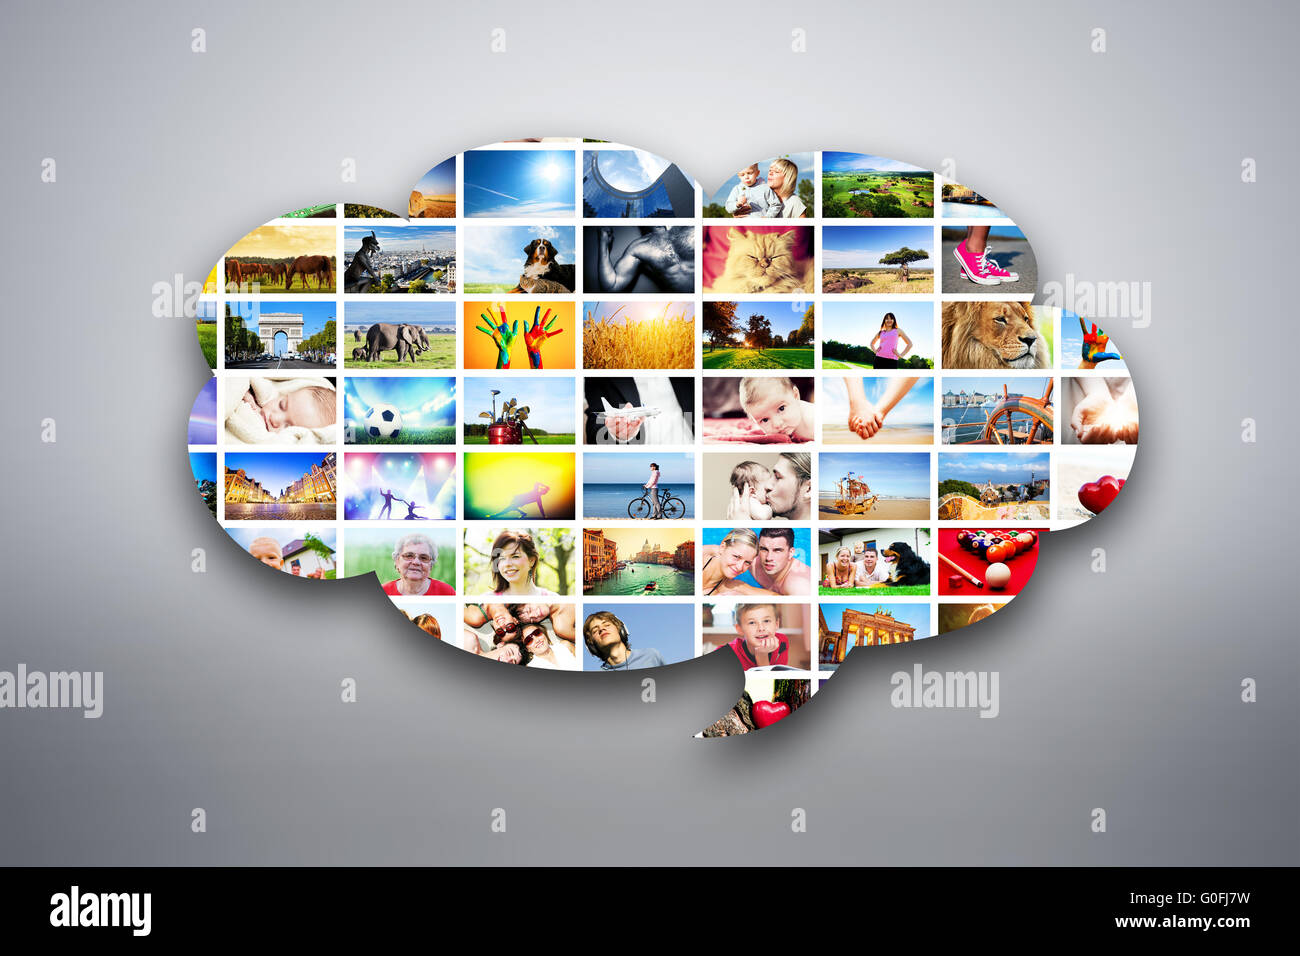 Speech bubble design element made of pictures Stock Photo